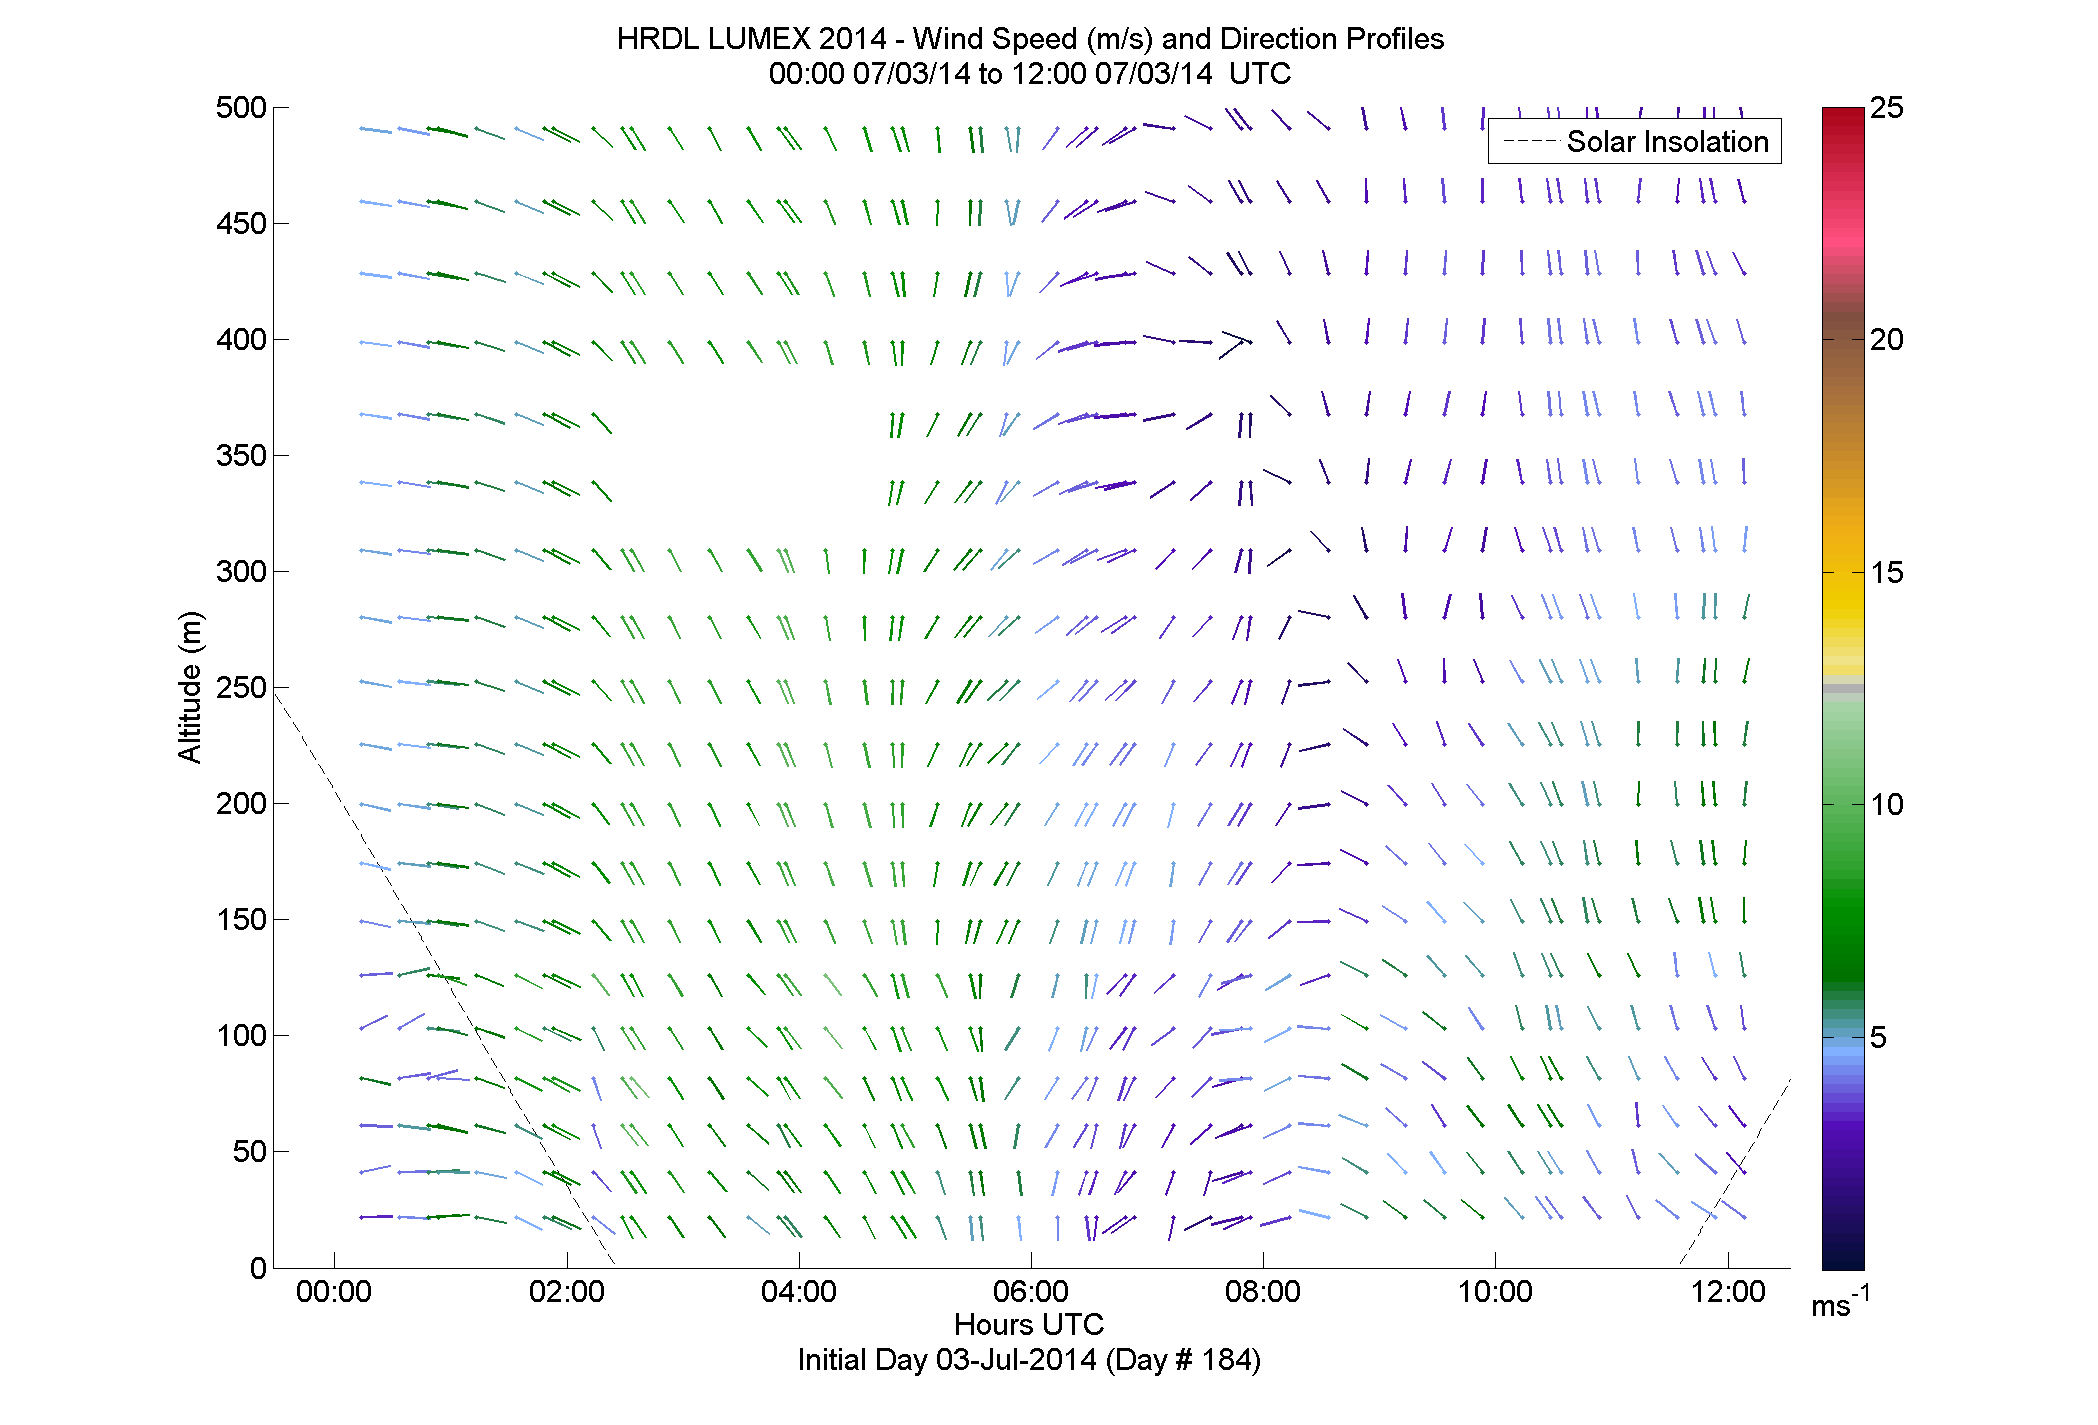 HRDL speed and direction profile - July 3 am